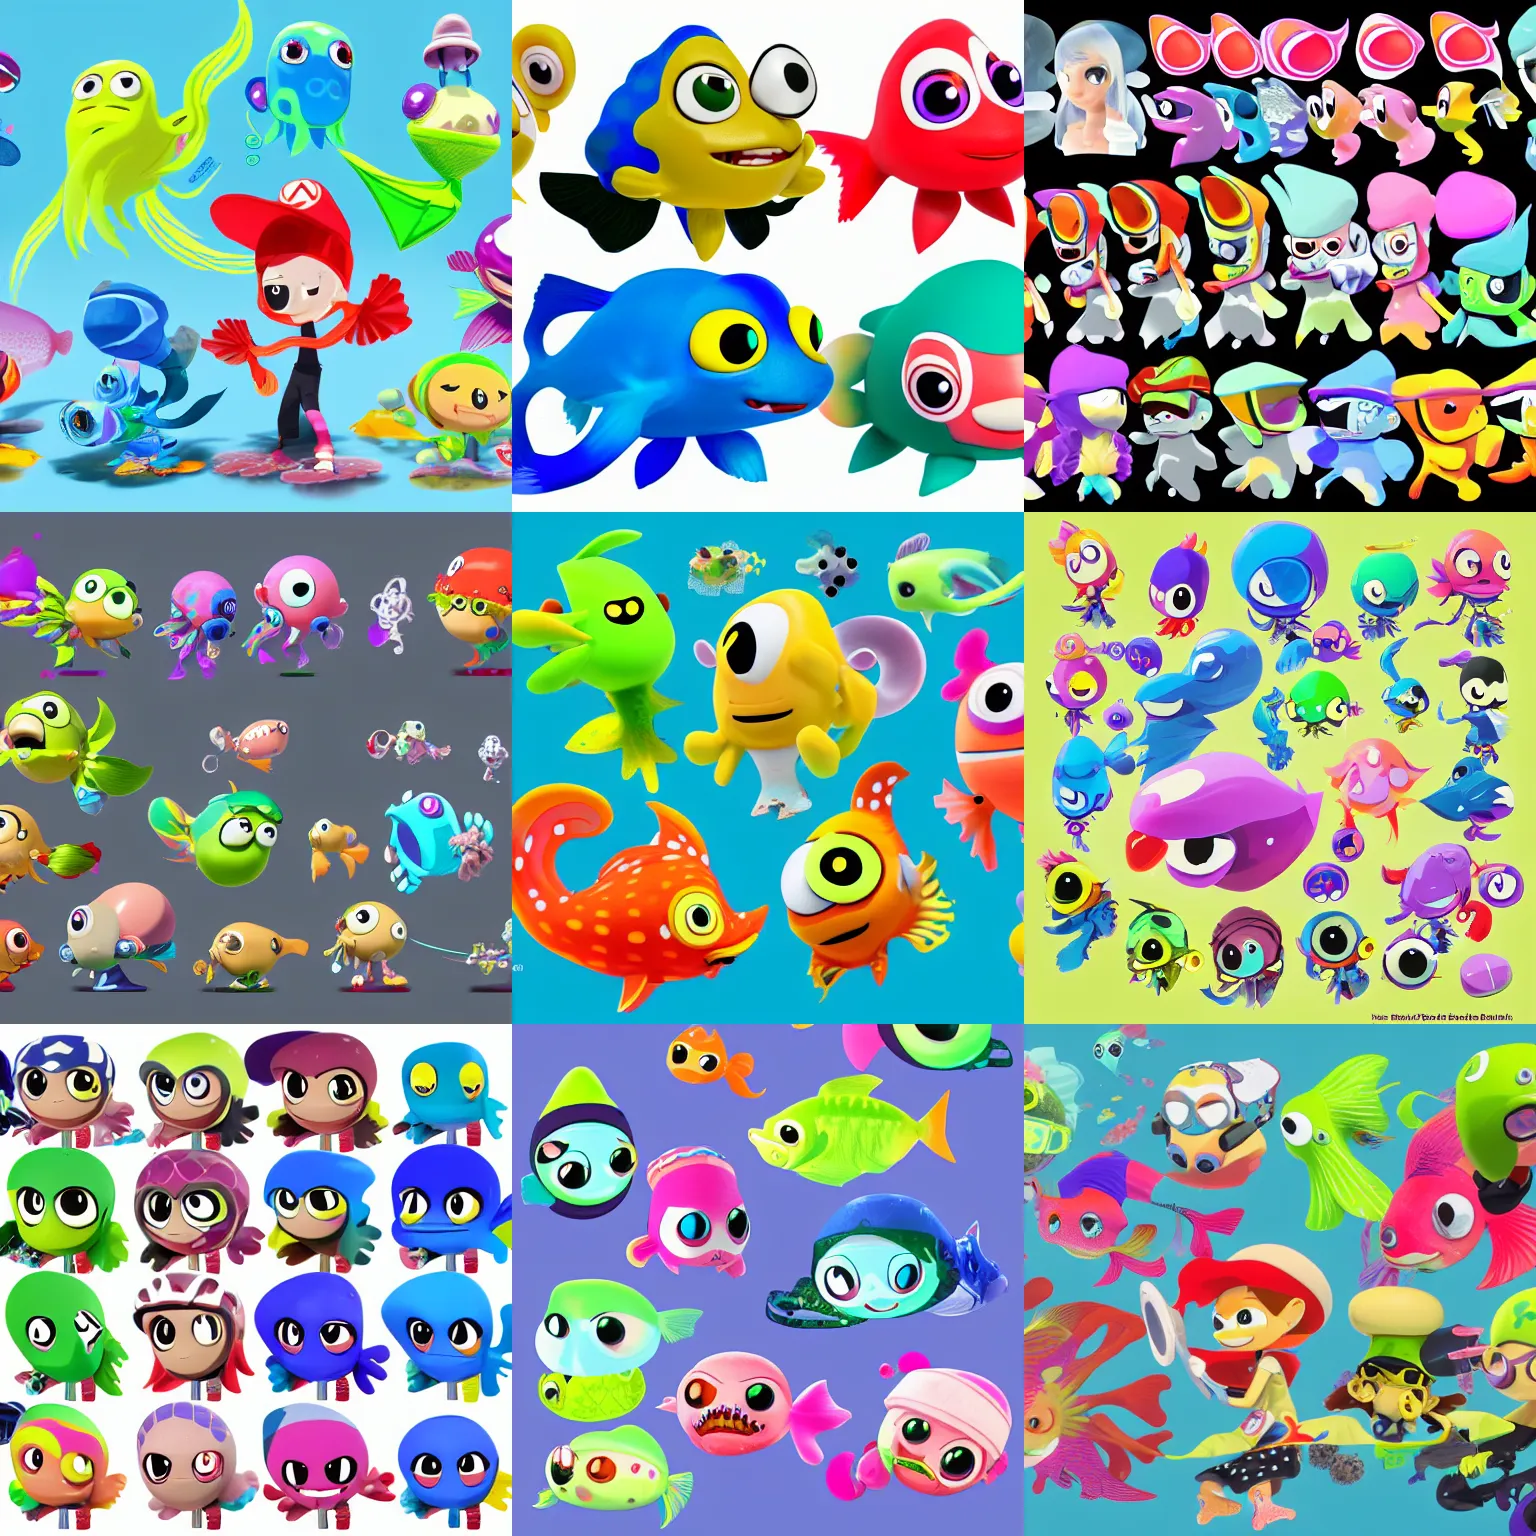 Prompt: character designs for background fish npc characters of various shapes and sizes in the Splatoon franchise by Nintendo, high resolution